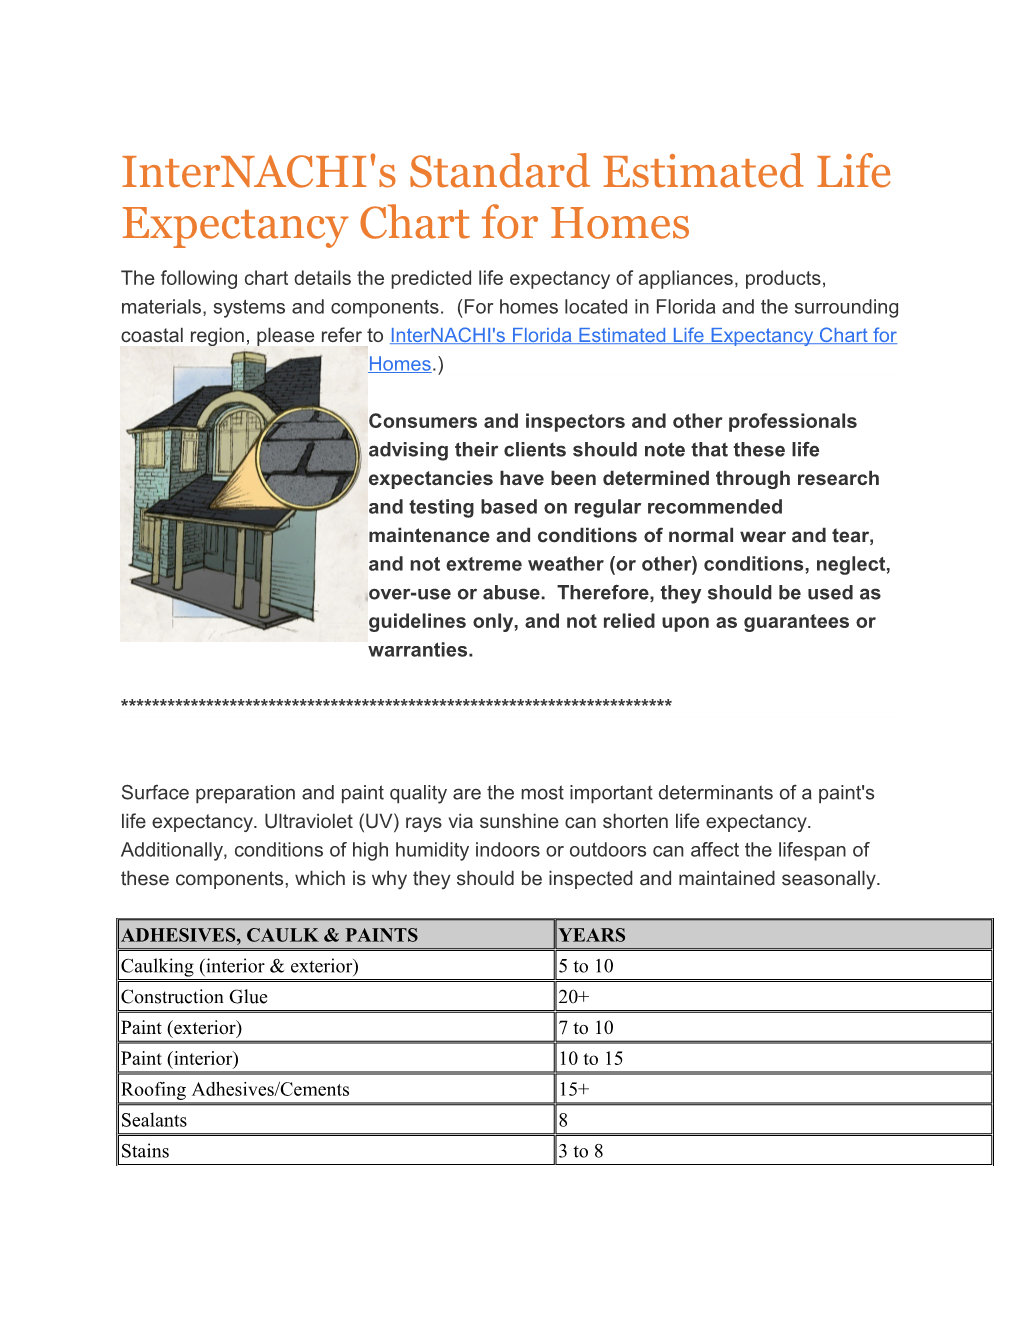 Internachi's Standard Estimated Life Expectancy Chart for Homes